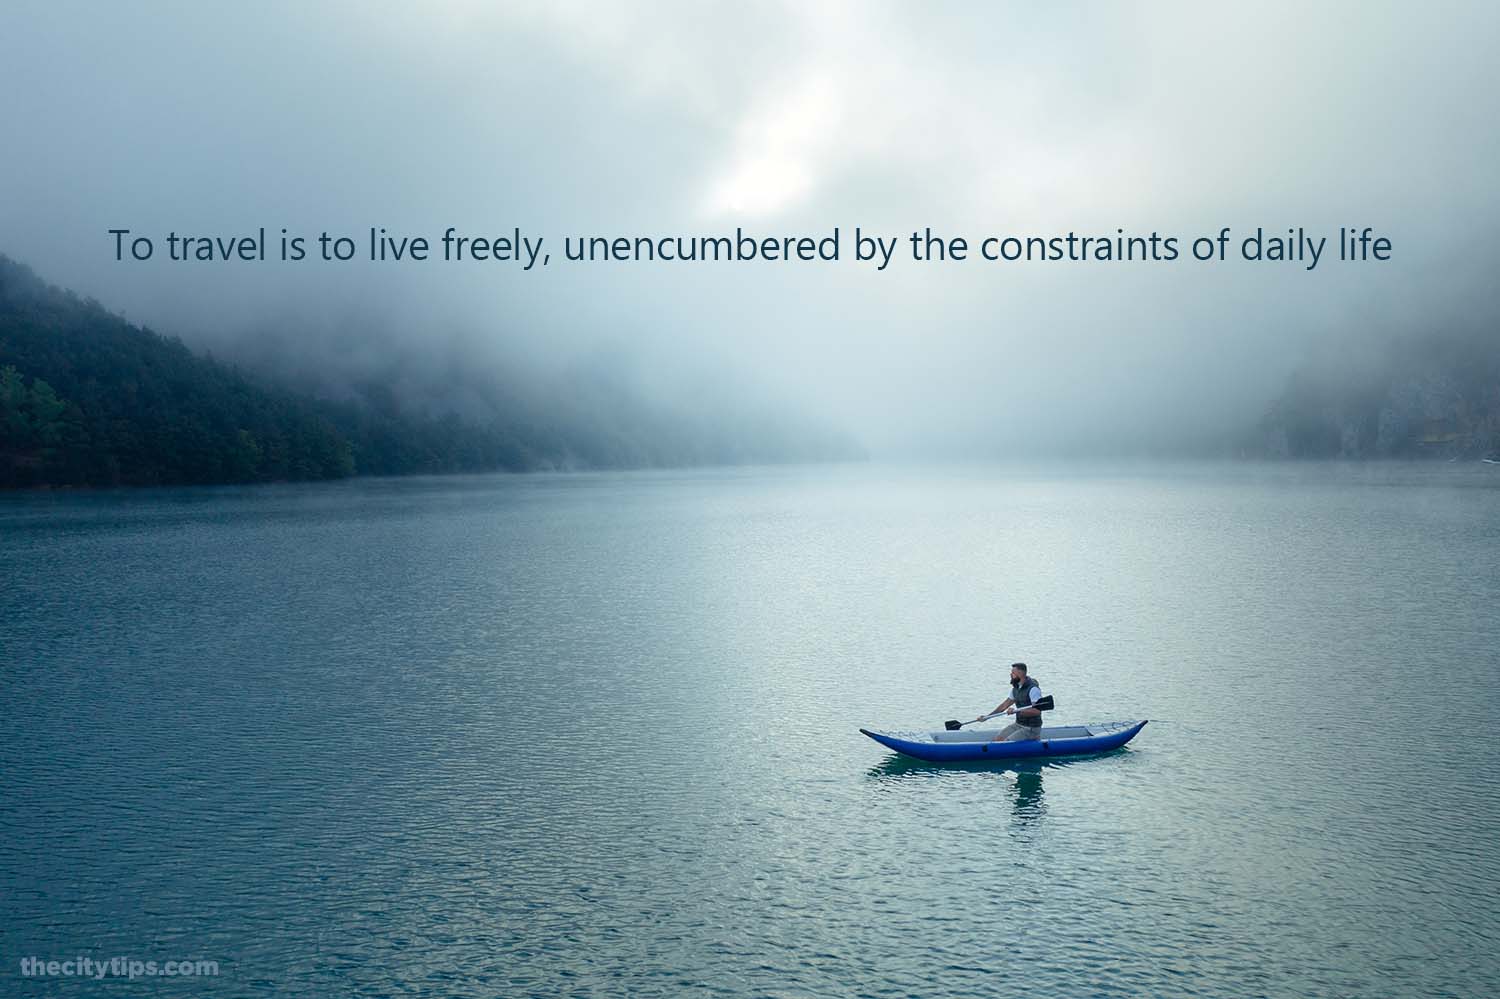 "To travel is to live freely, unencumbered by the constraints of daily life."